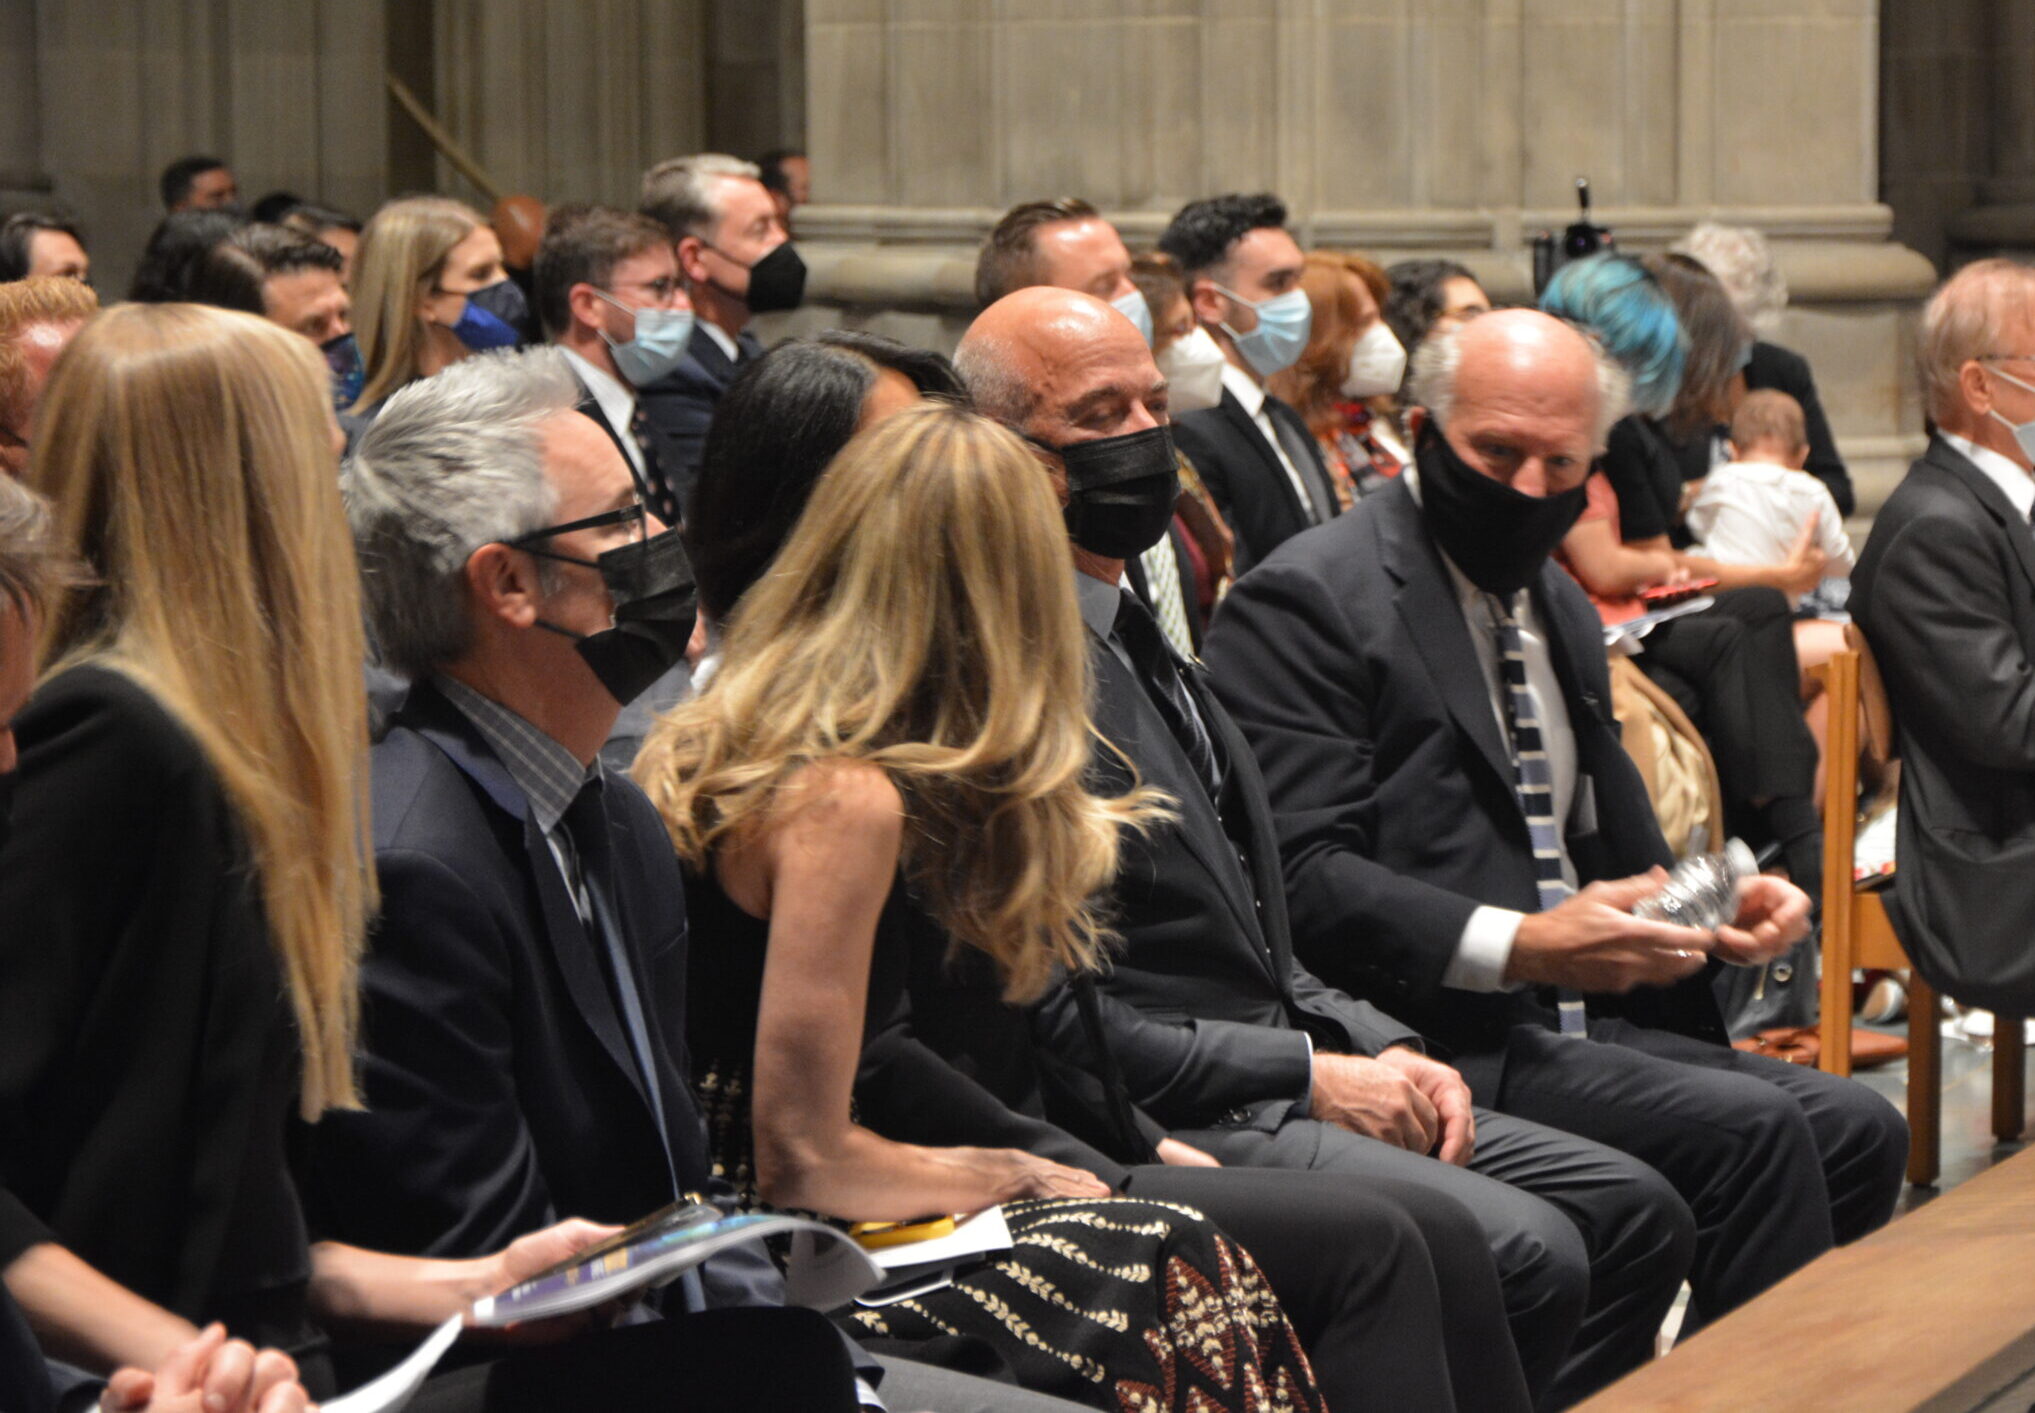 Amazon founder and Blue Origin head Jeff Bezos sits in the pews of the Washington National Cathedral on November 10, 2021. (RNS Photo by Jack Jenkins)